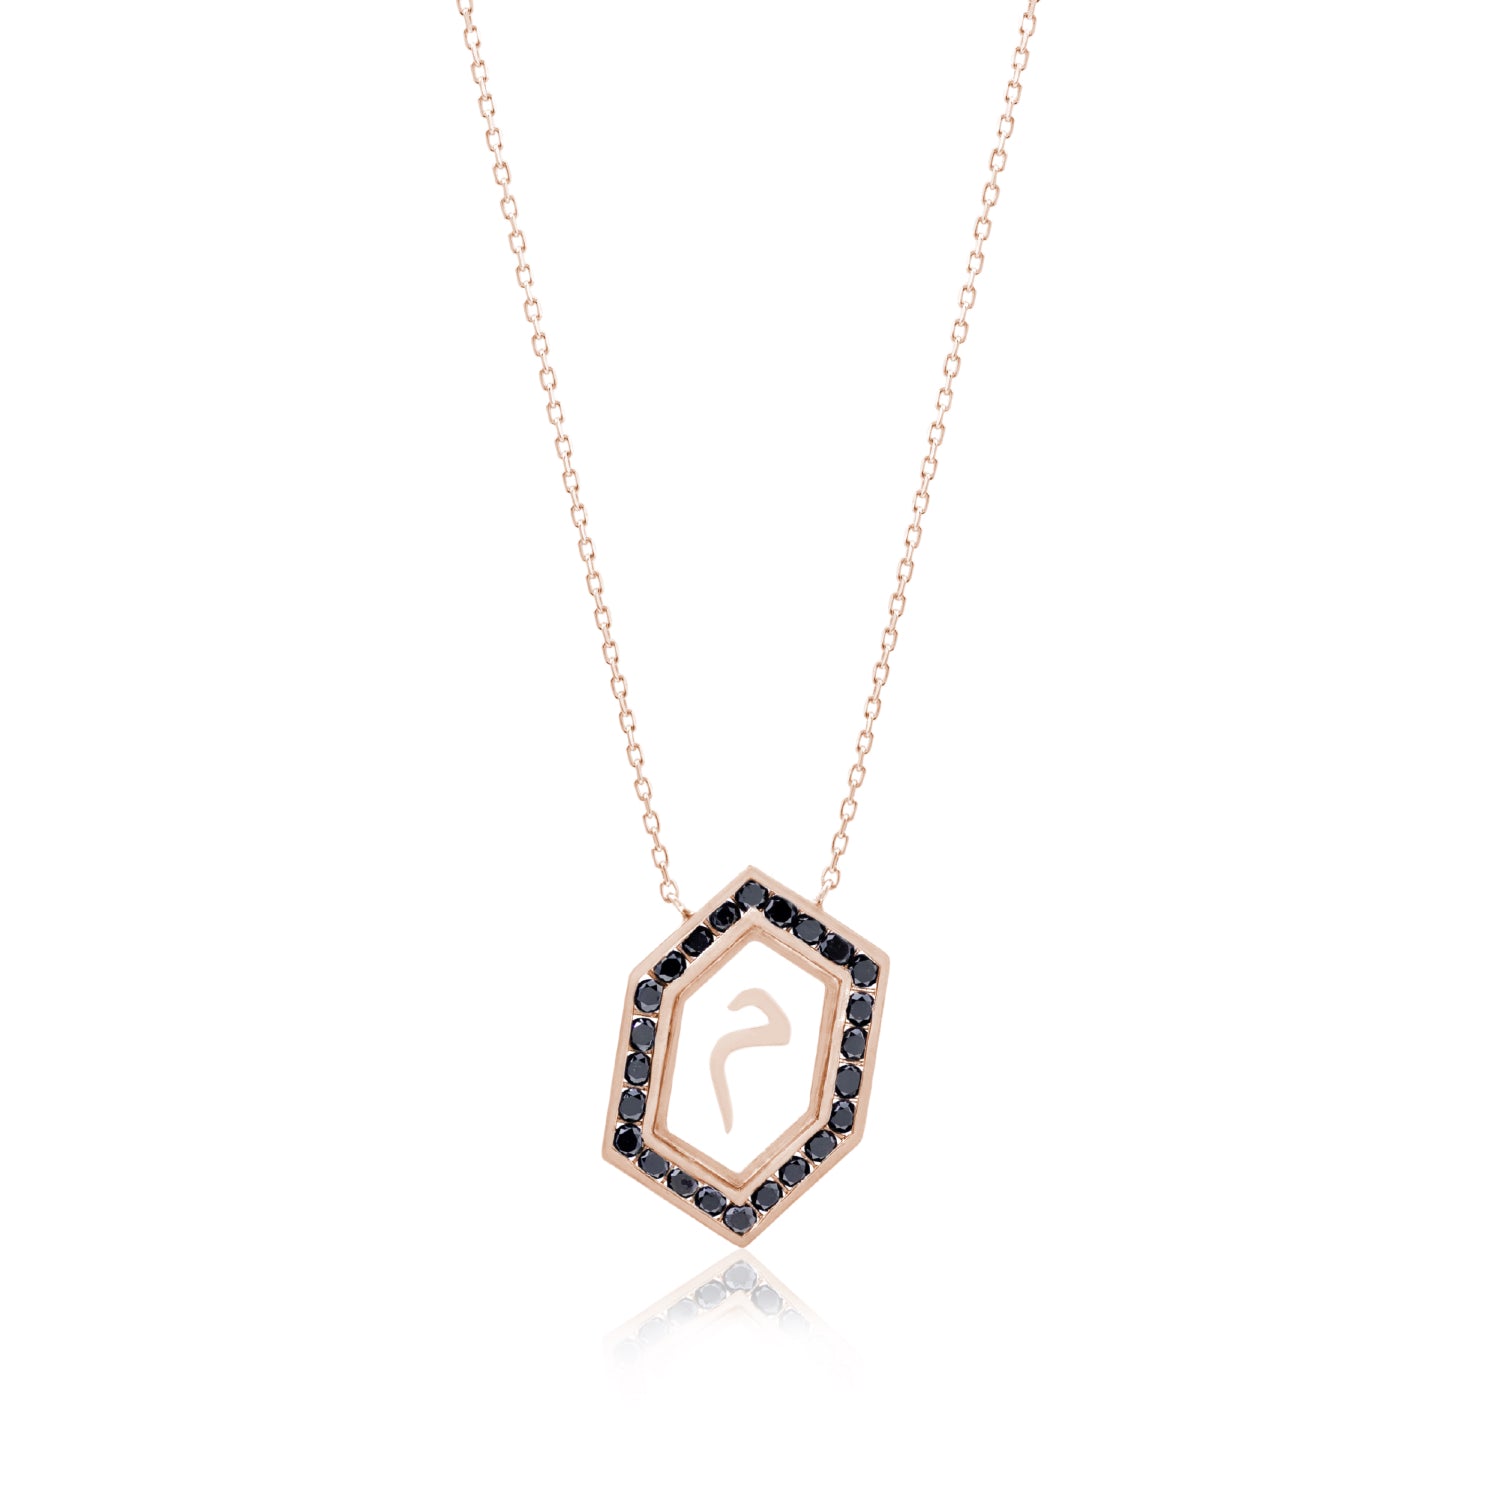 Qamoos 1.0 Letter م Black Diamond Necklace in Rose Gold